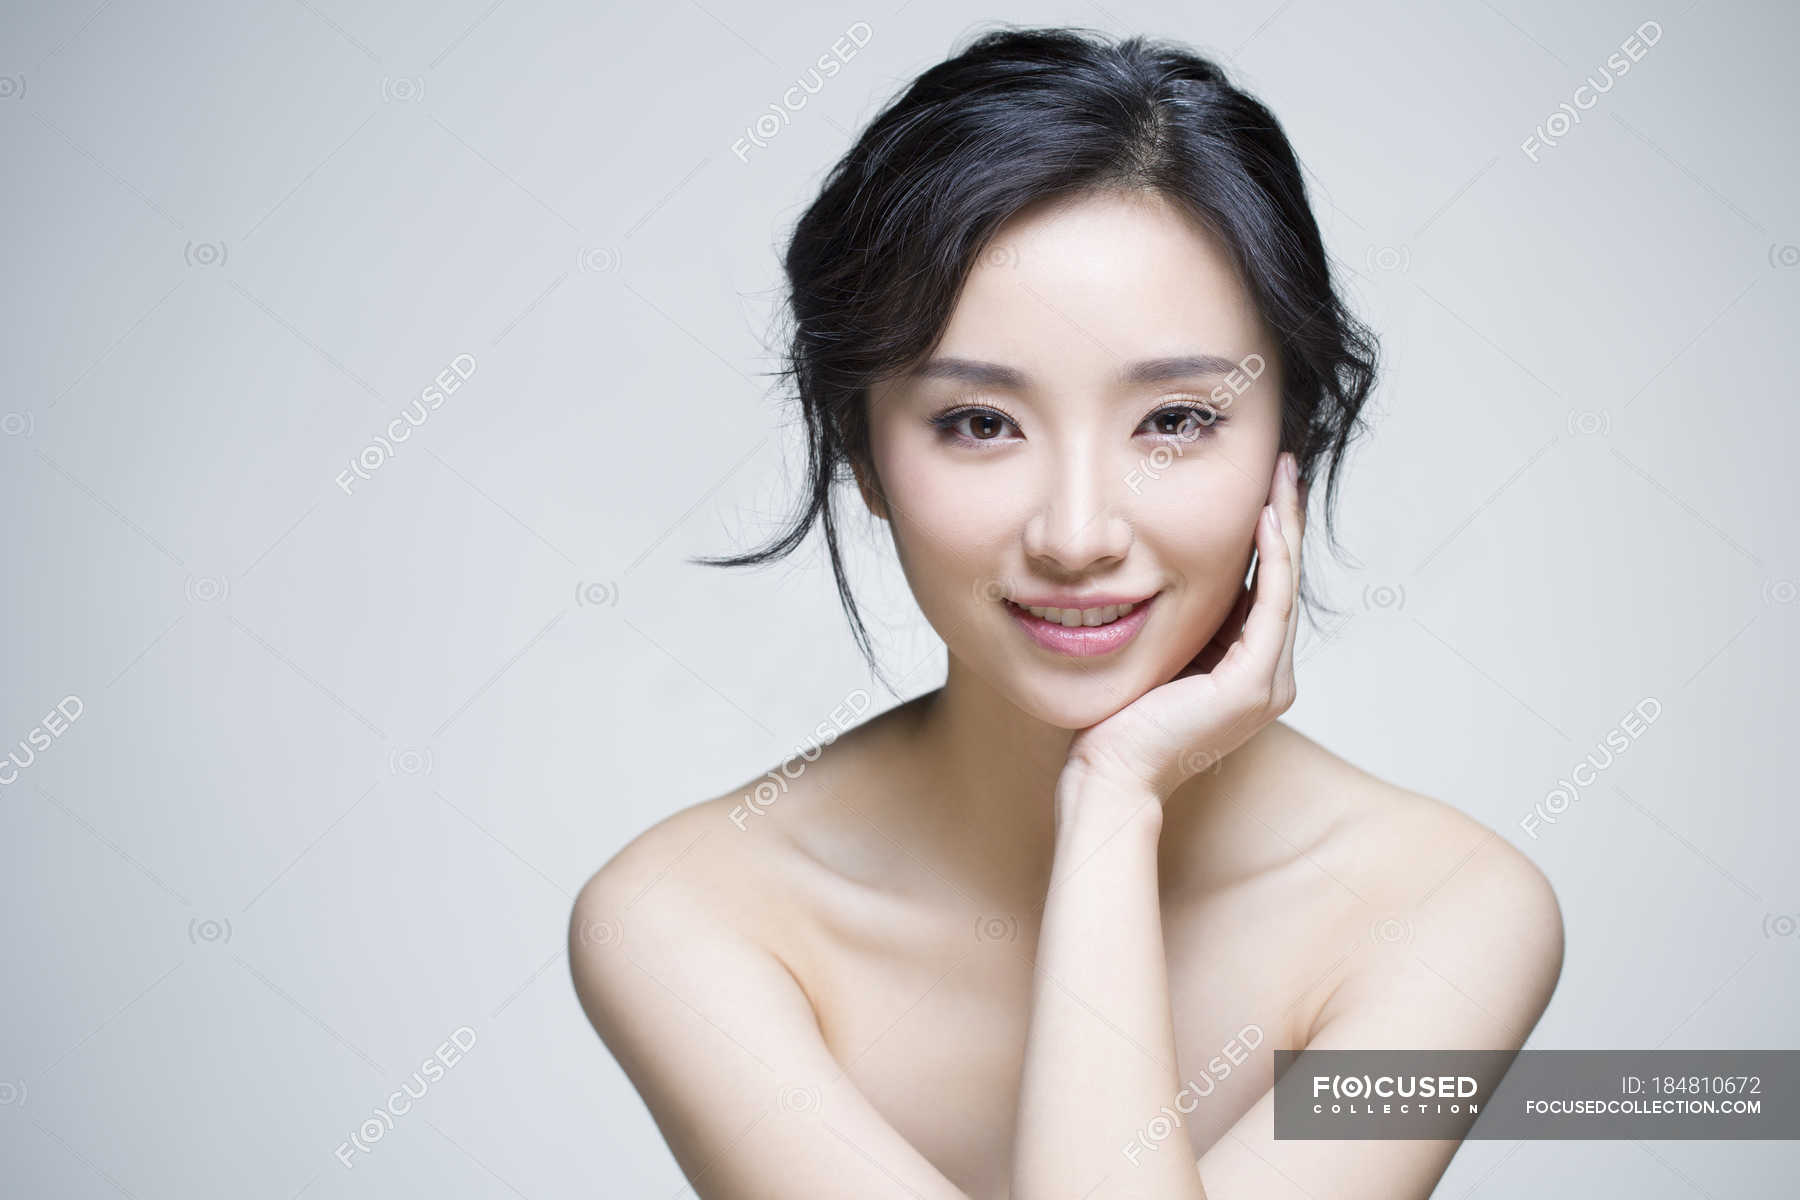 Chinese woman posing with hand on chin — Stock Photo | #184810672